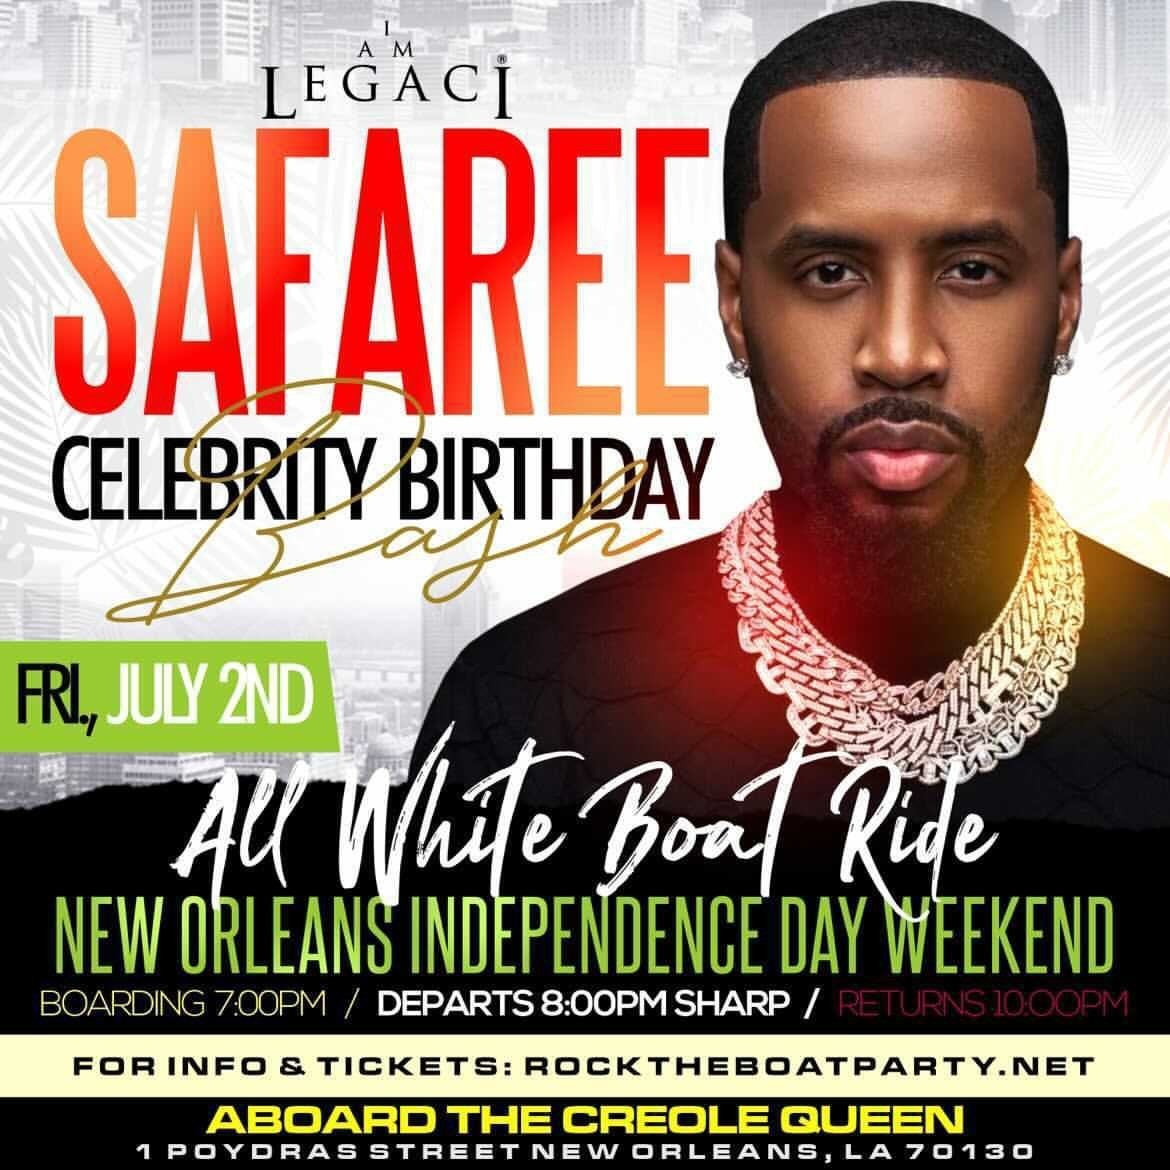 SAFAREE CELEBRITY BIRTHDAY ALL WHITE BOAT RIDE PARTY NEW ORLEANS INDEPENDENCE DAY WEEKEND